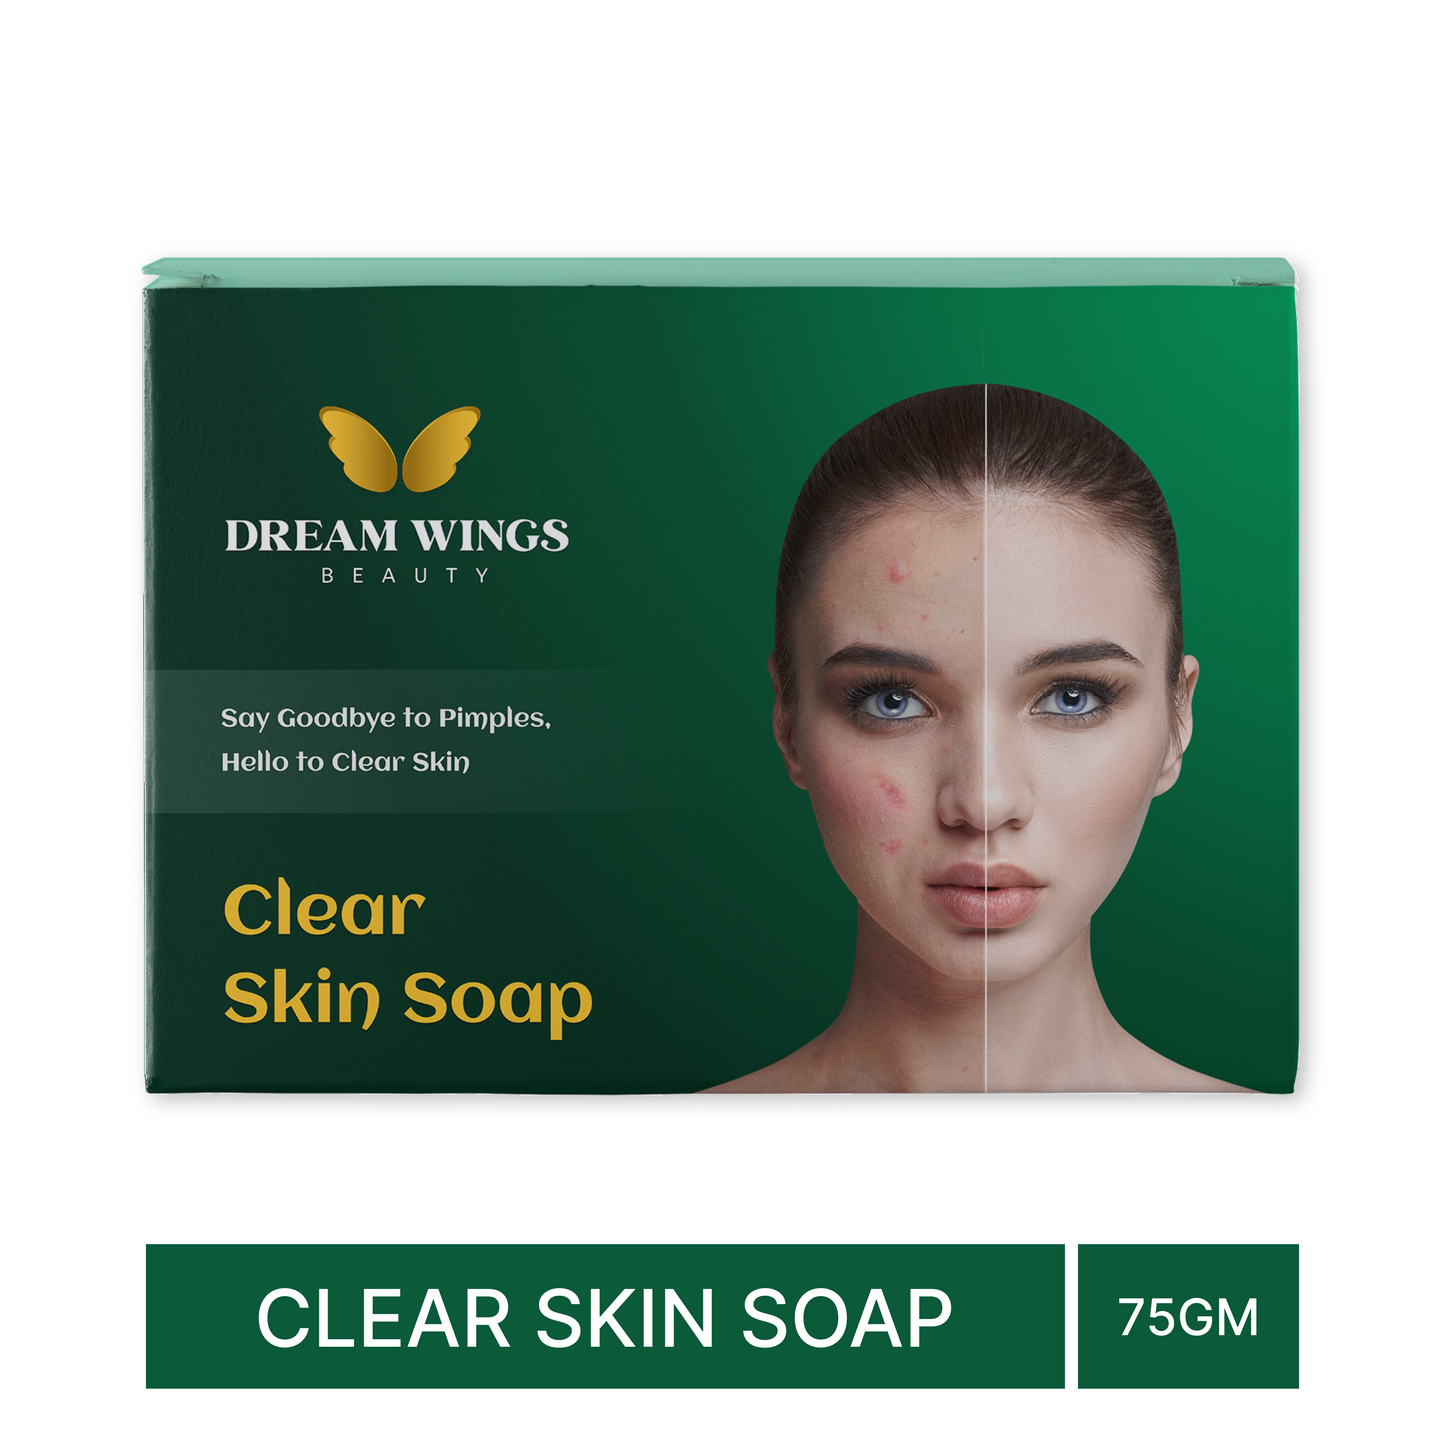 Clear Skin Soap - Your Ultimate Solution for Acne, Pimple, Sun Tan, Blemishes, Fine Lines, Dark Spots | Men & Women | All Skin Types - 75gm